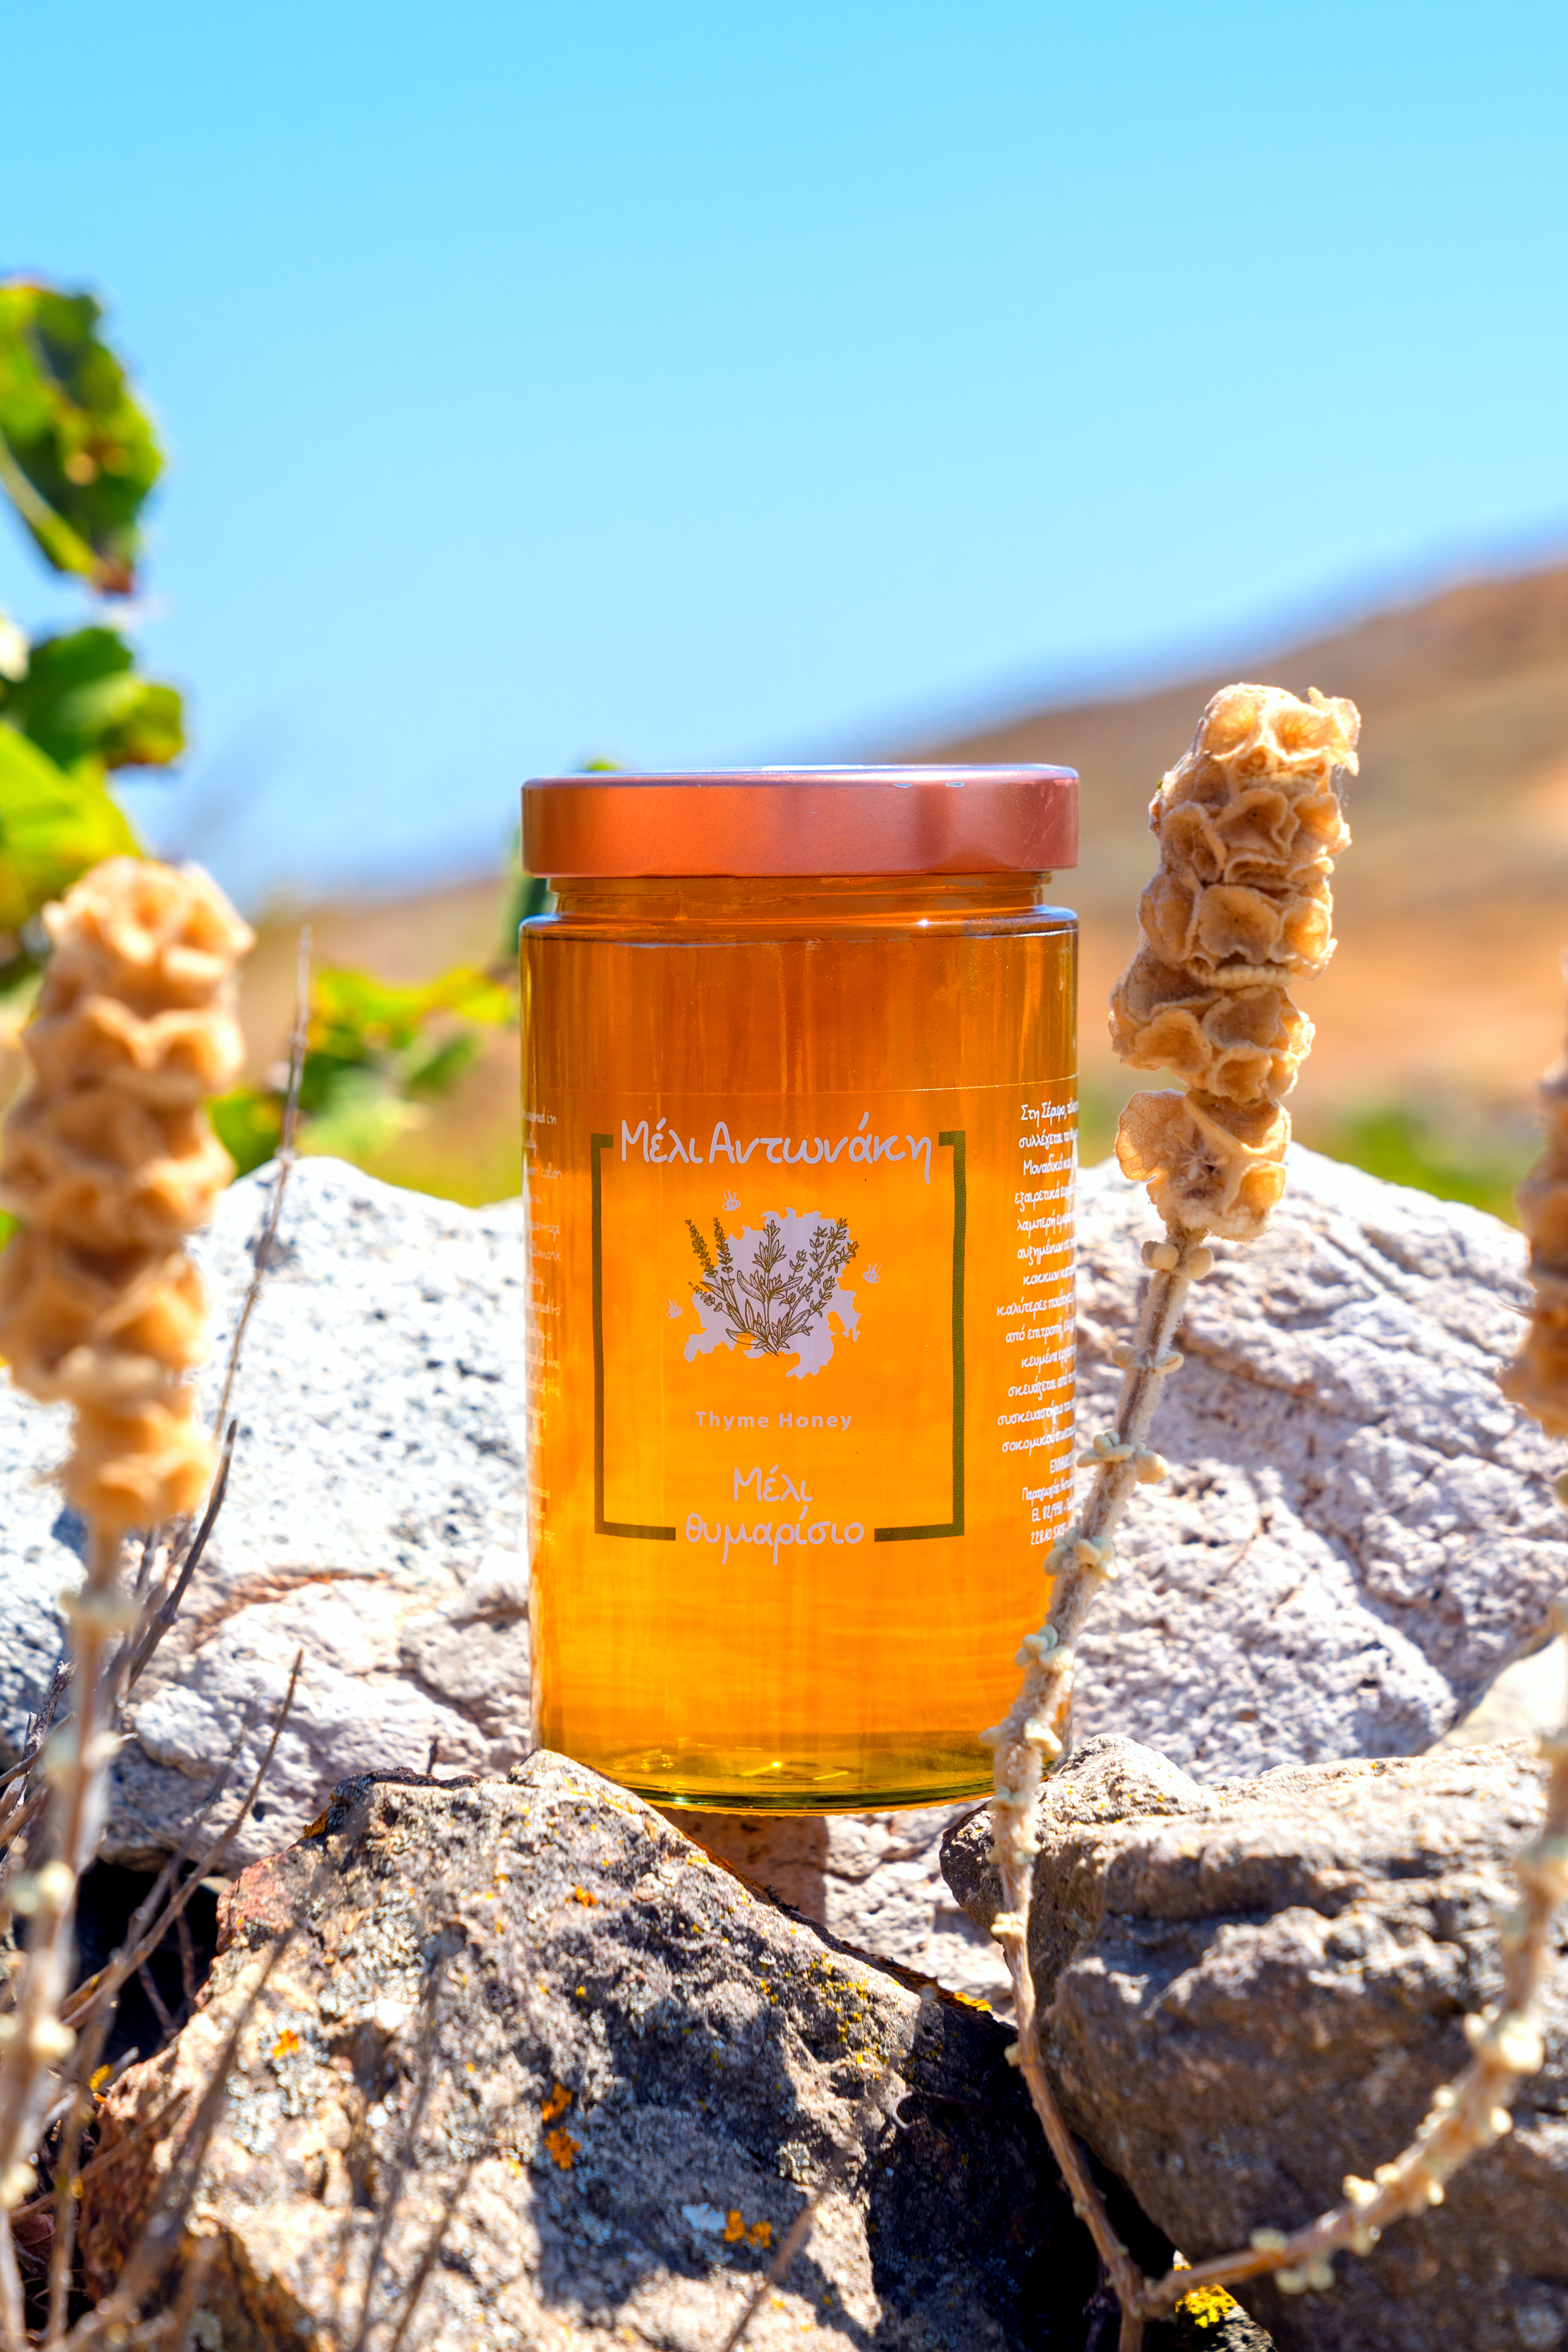 Thyme Honey, from Serifos island